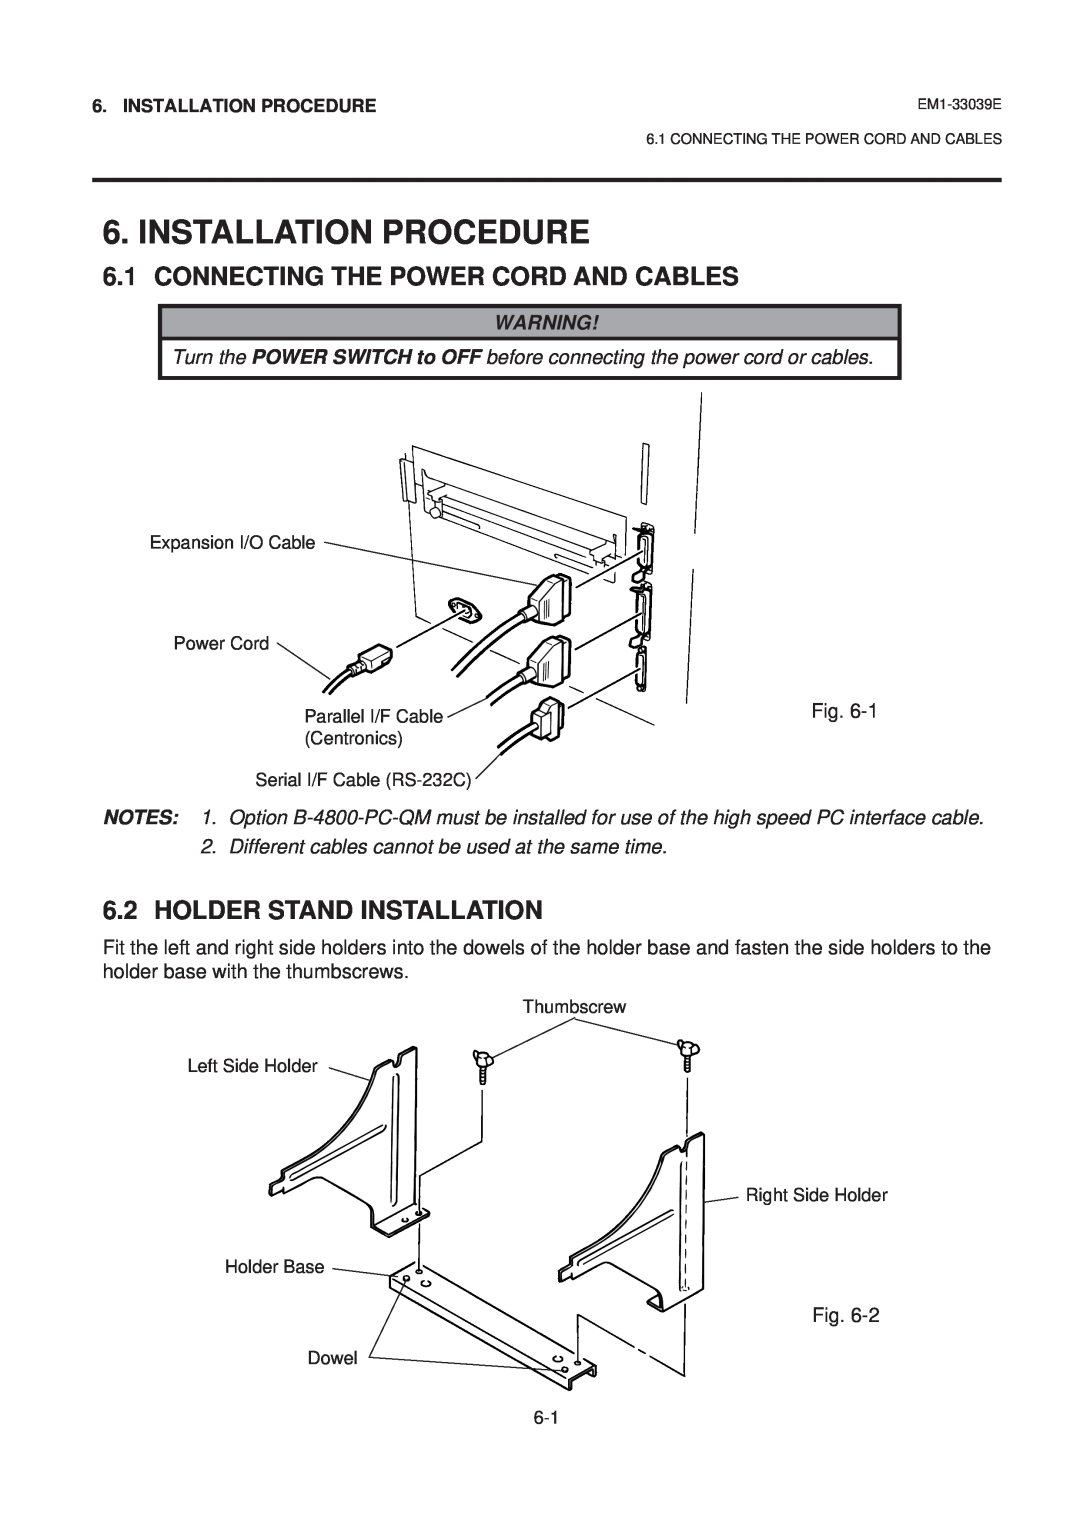 Toshiba EM1-33039EE owner manual Installation Procedure, Connecting The Power Cord And Cables, Holder Stand Installation 